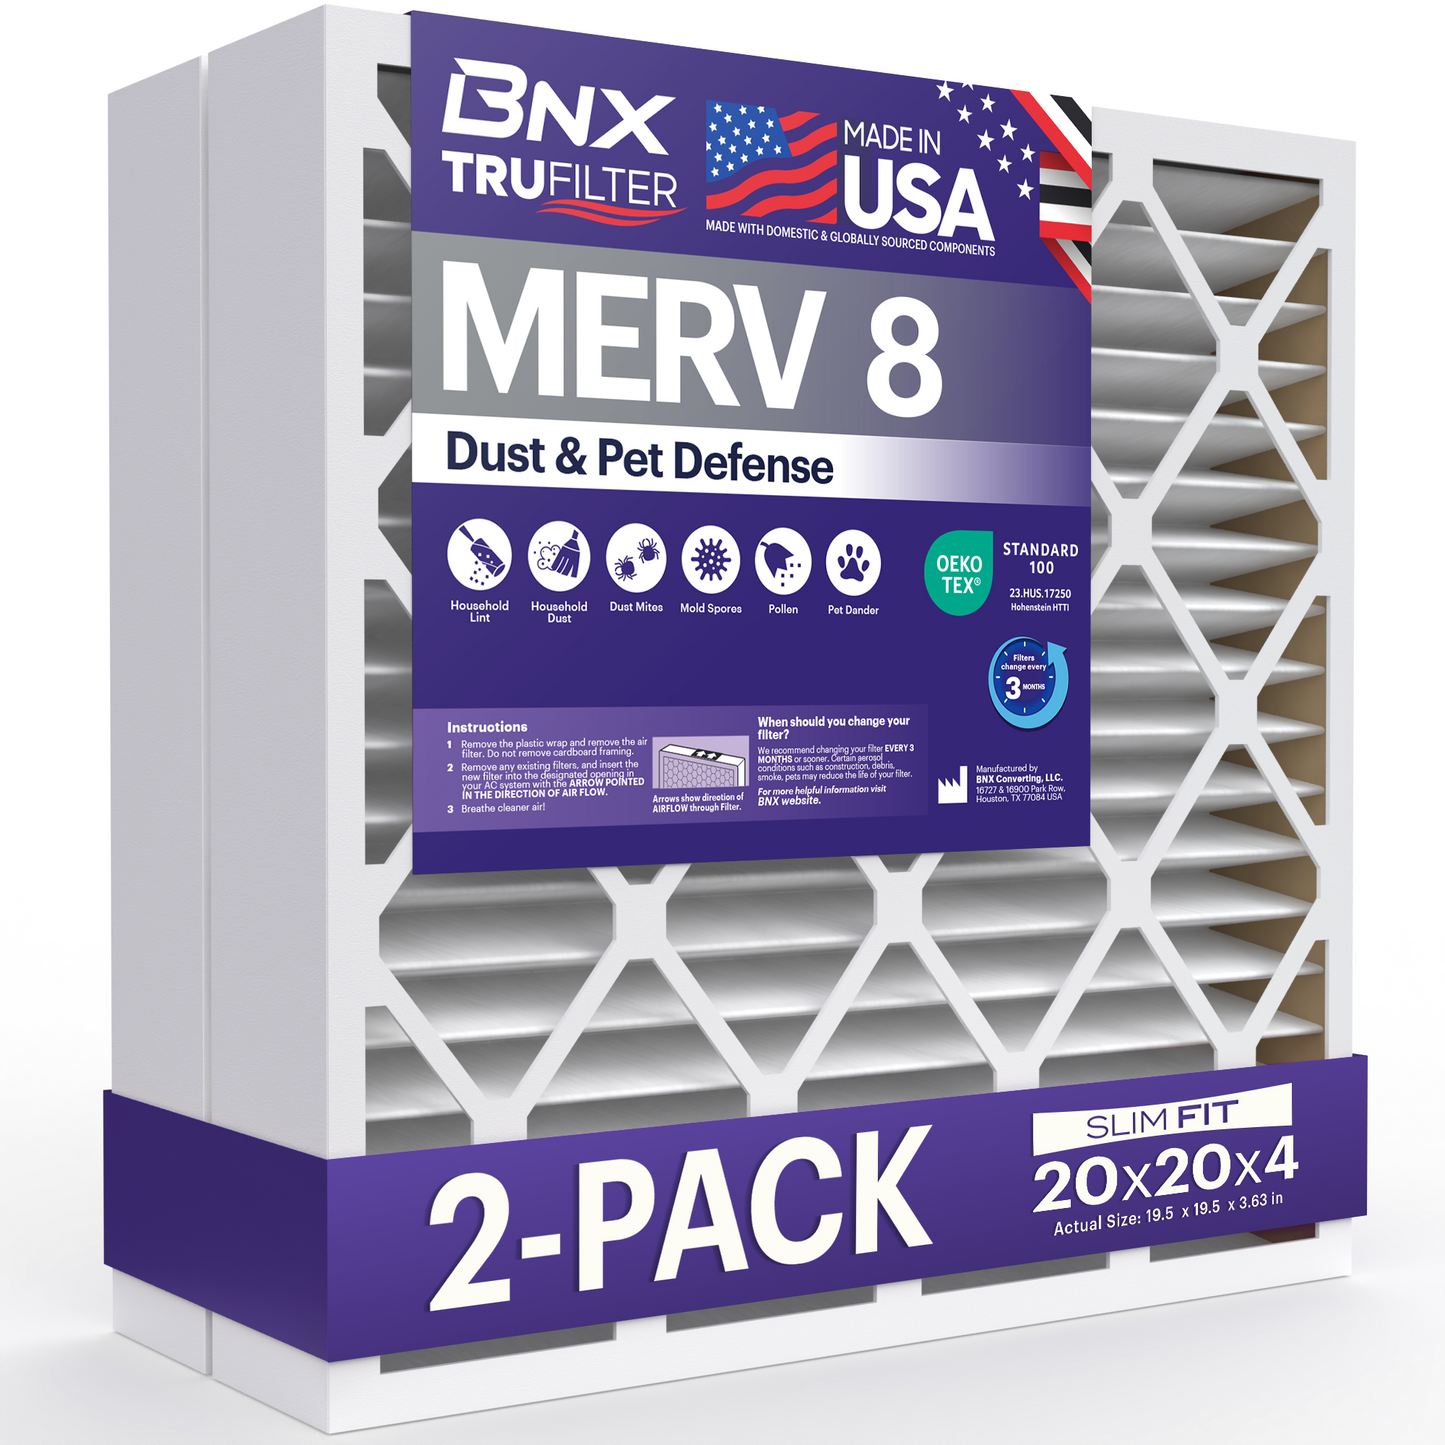 BNX TruFilter 20x20x4 MERV 8 Pleated Air Filter – Made in USA (2-Pack) (Slim Fit)